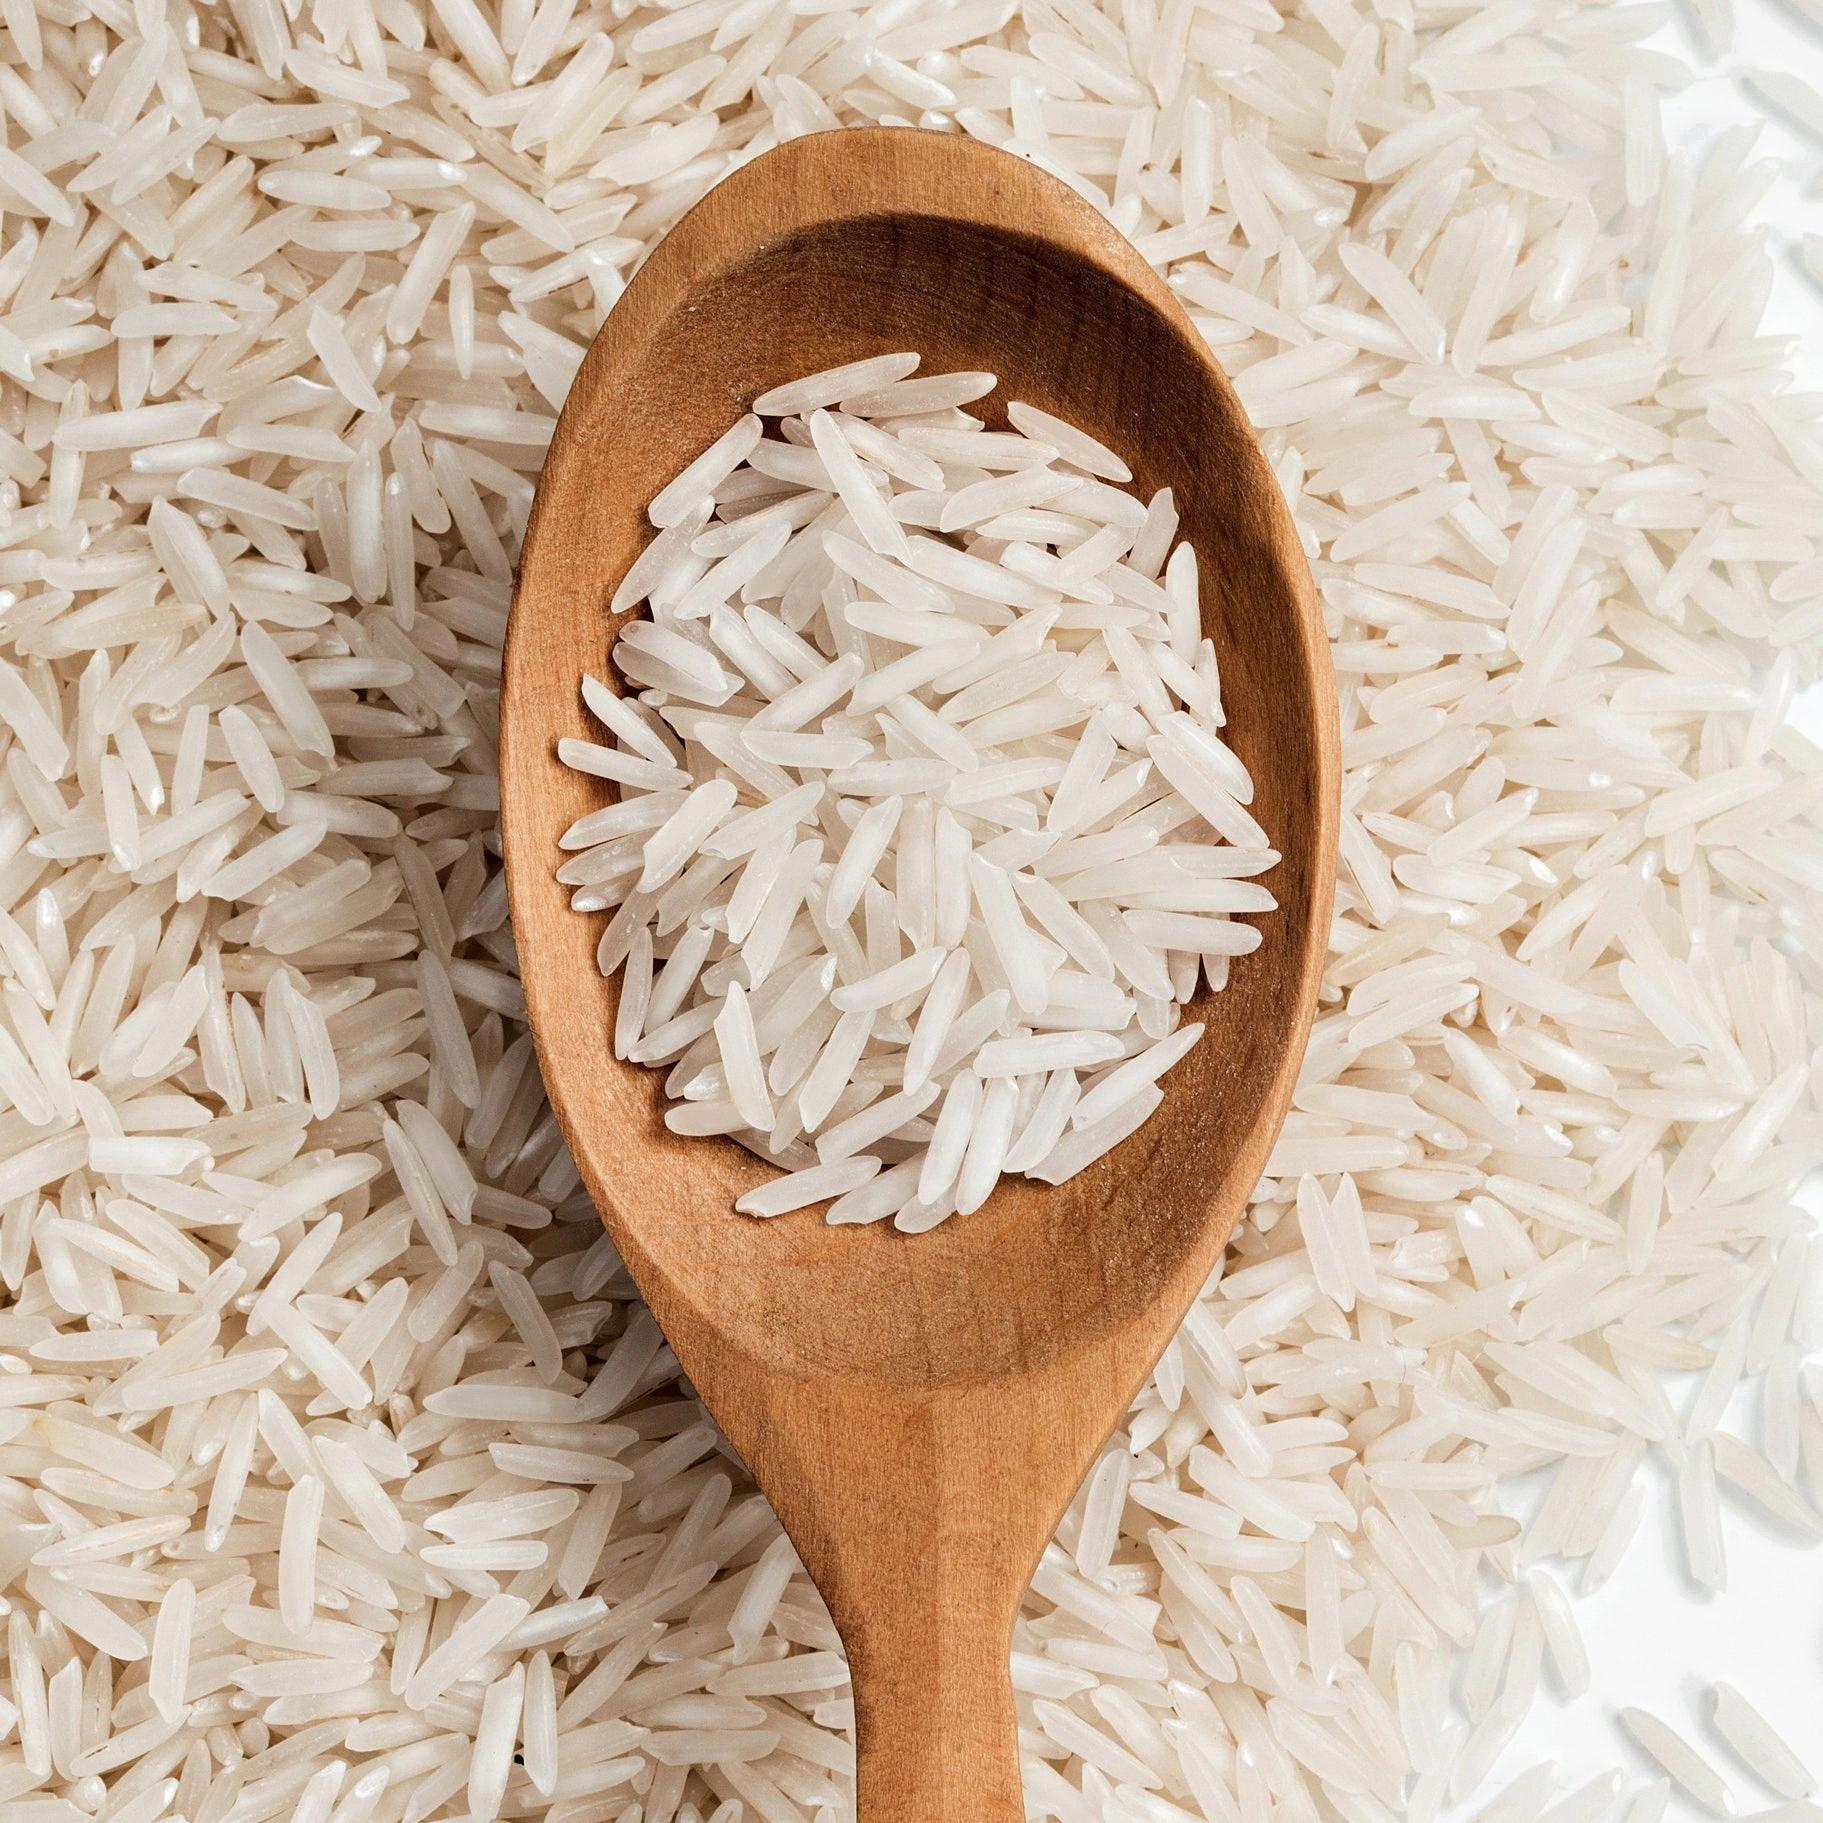 does rice make you fat